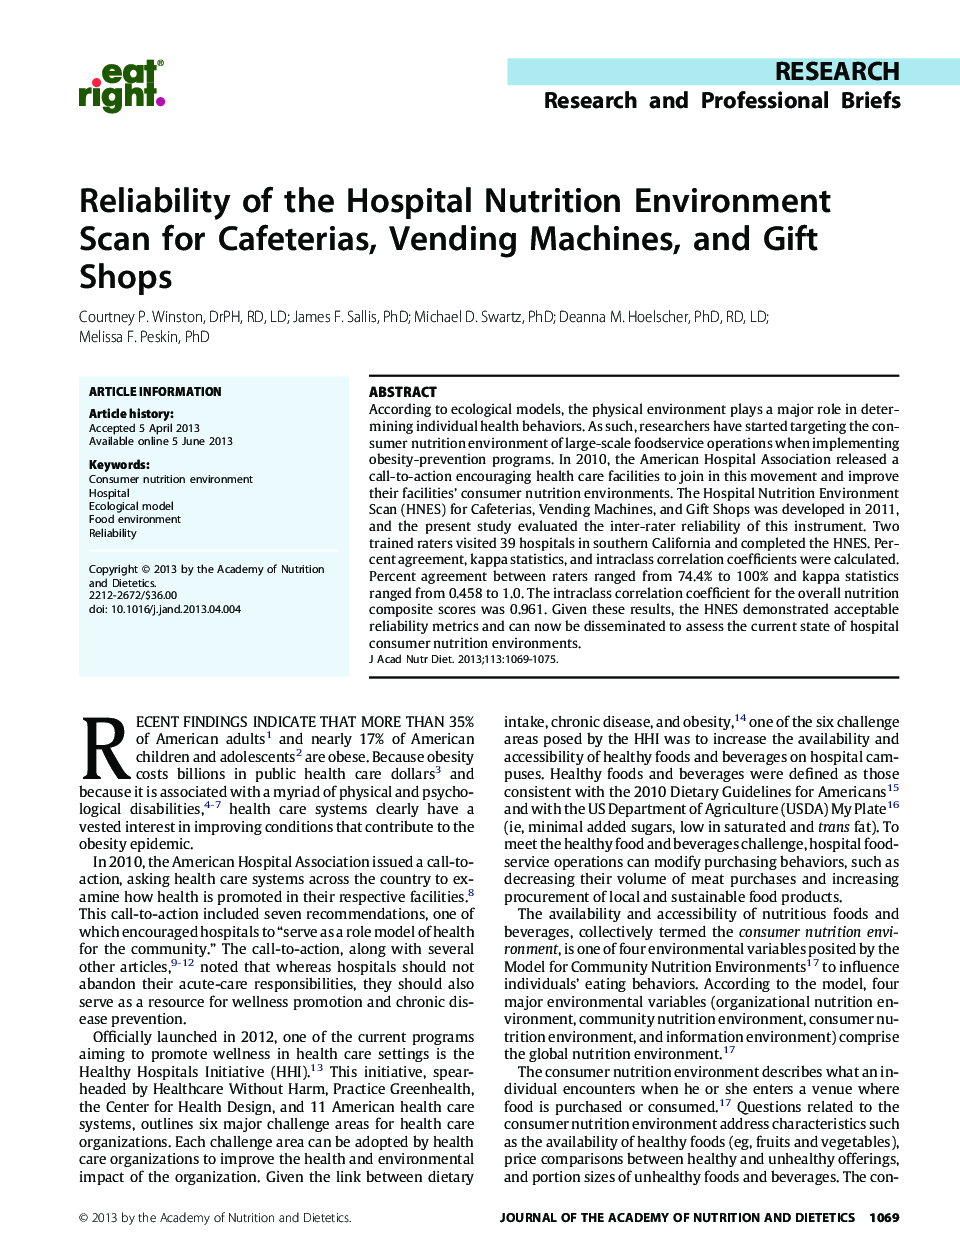 Reliability of the Hospital Nutrition Environment Scan for Cafeterias, Vending Machines, and Gift Shops 